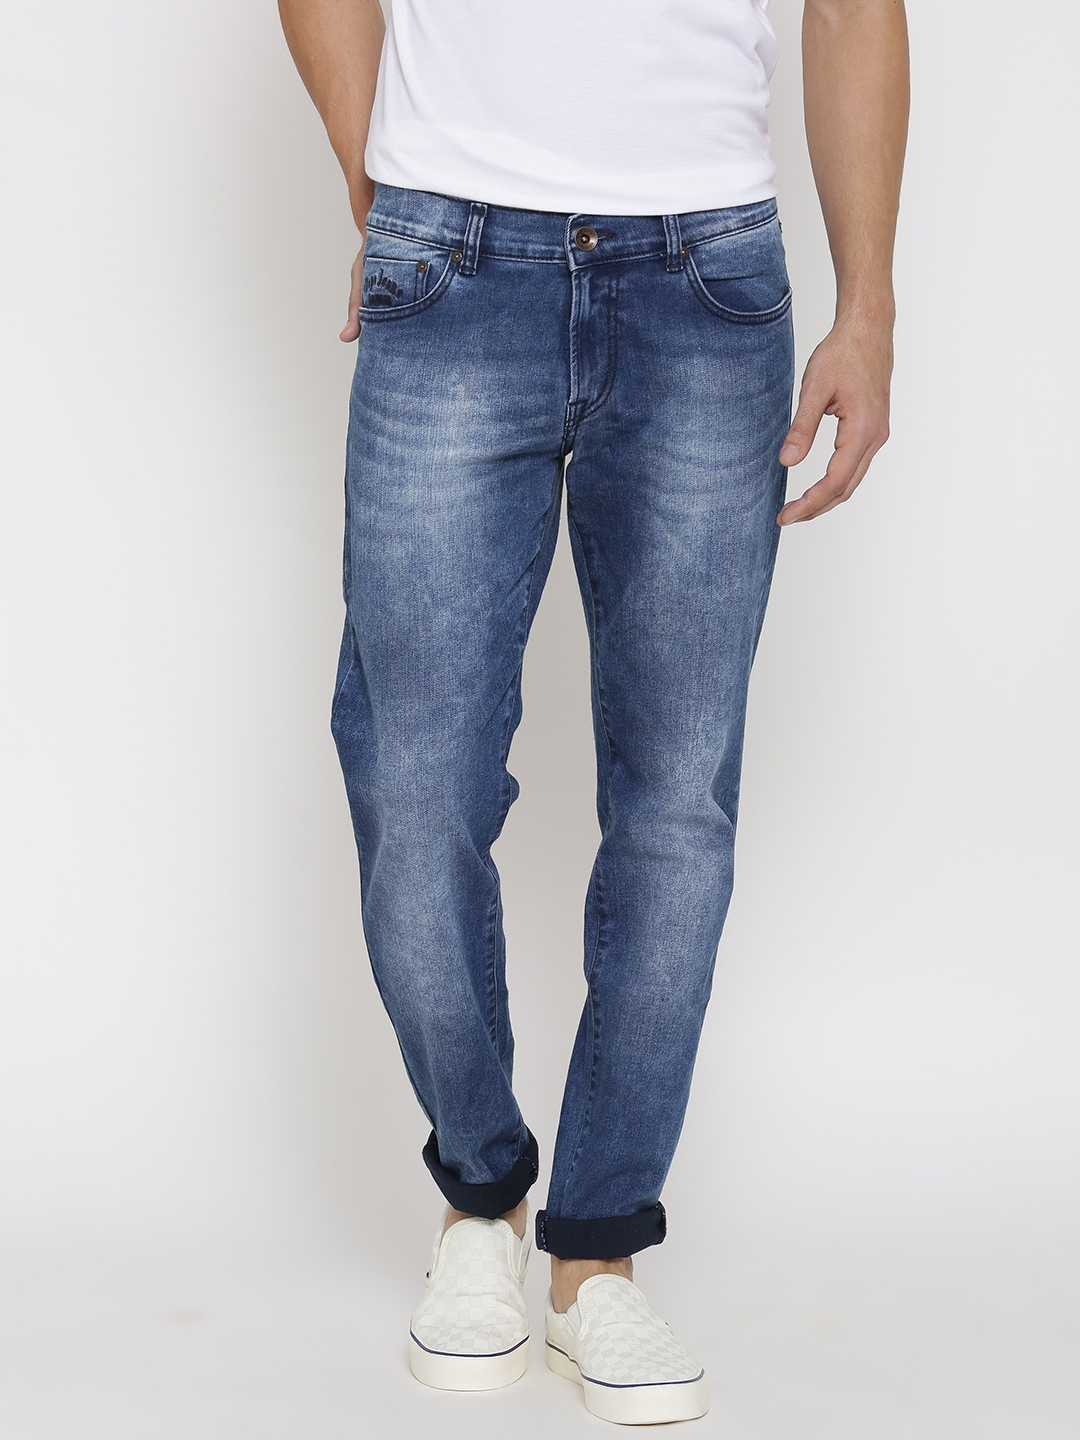 Buy Pepe Jeans Men Blue for Hatch Stretchable Jeans Regular | Clean Men 1475536 - Fit Look Low Myntra Rise Jeans